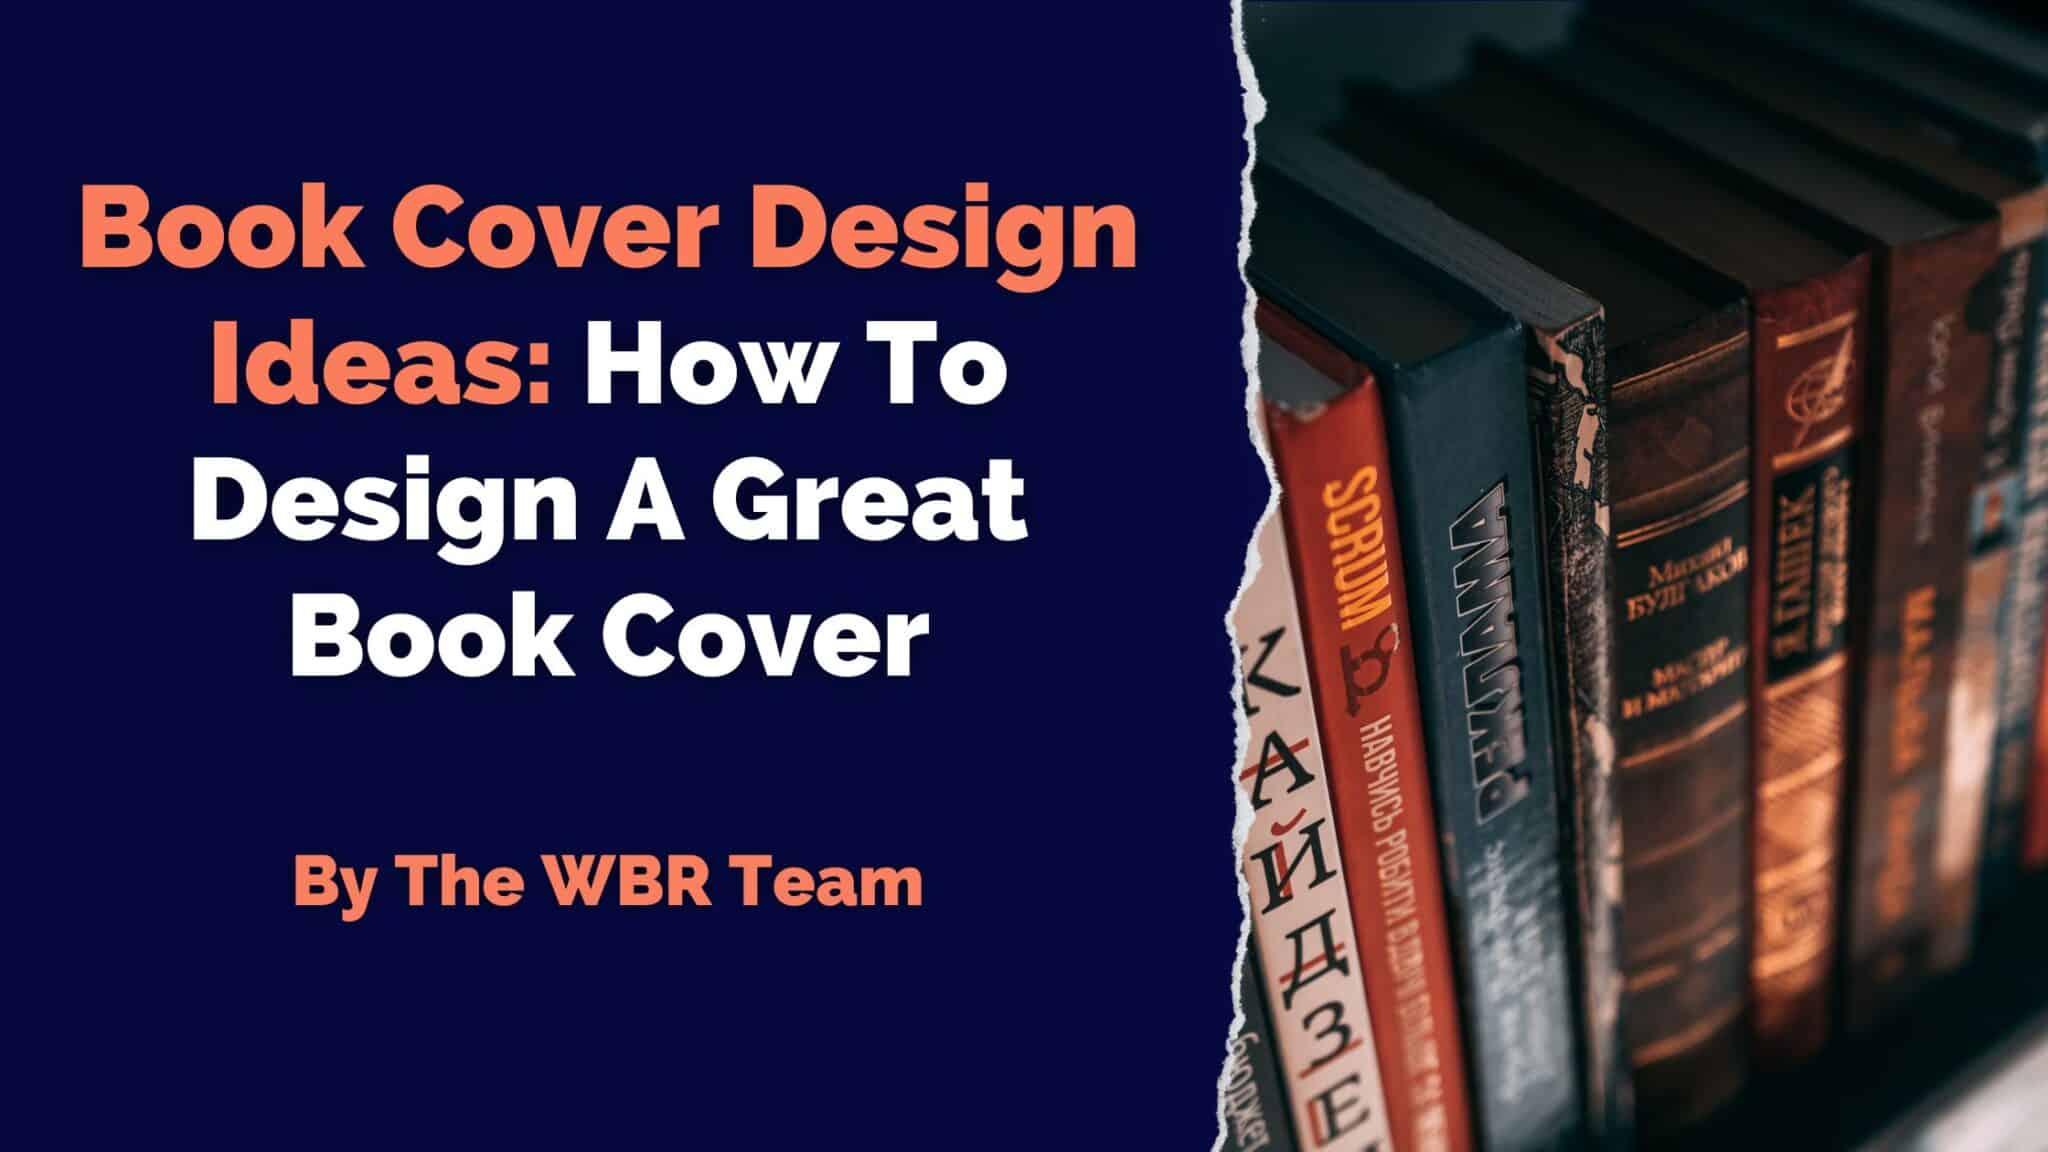 Book Cover Design Ideas: How To Design A Great Book Cover